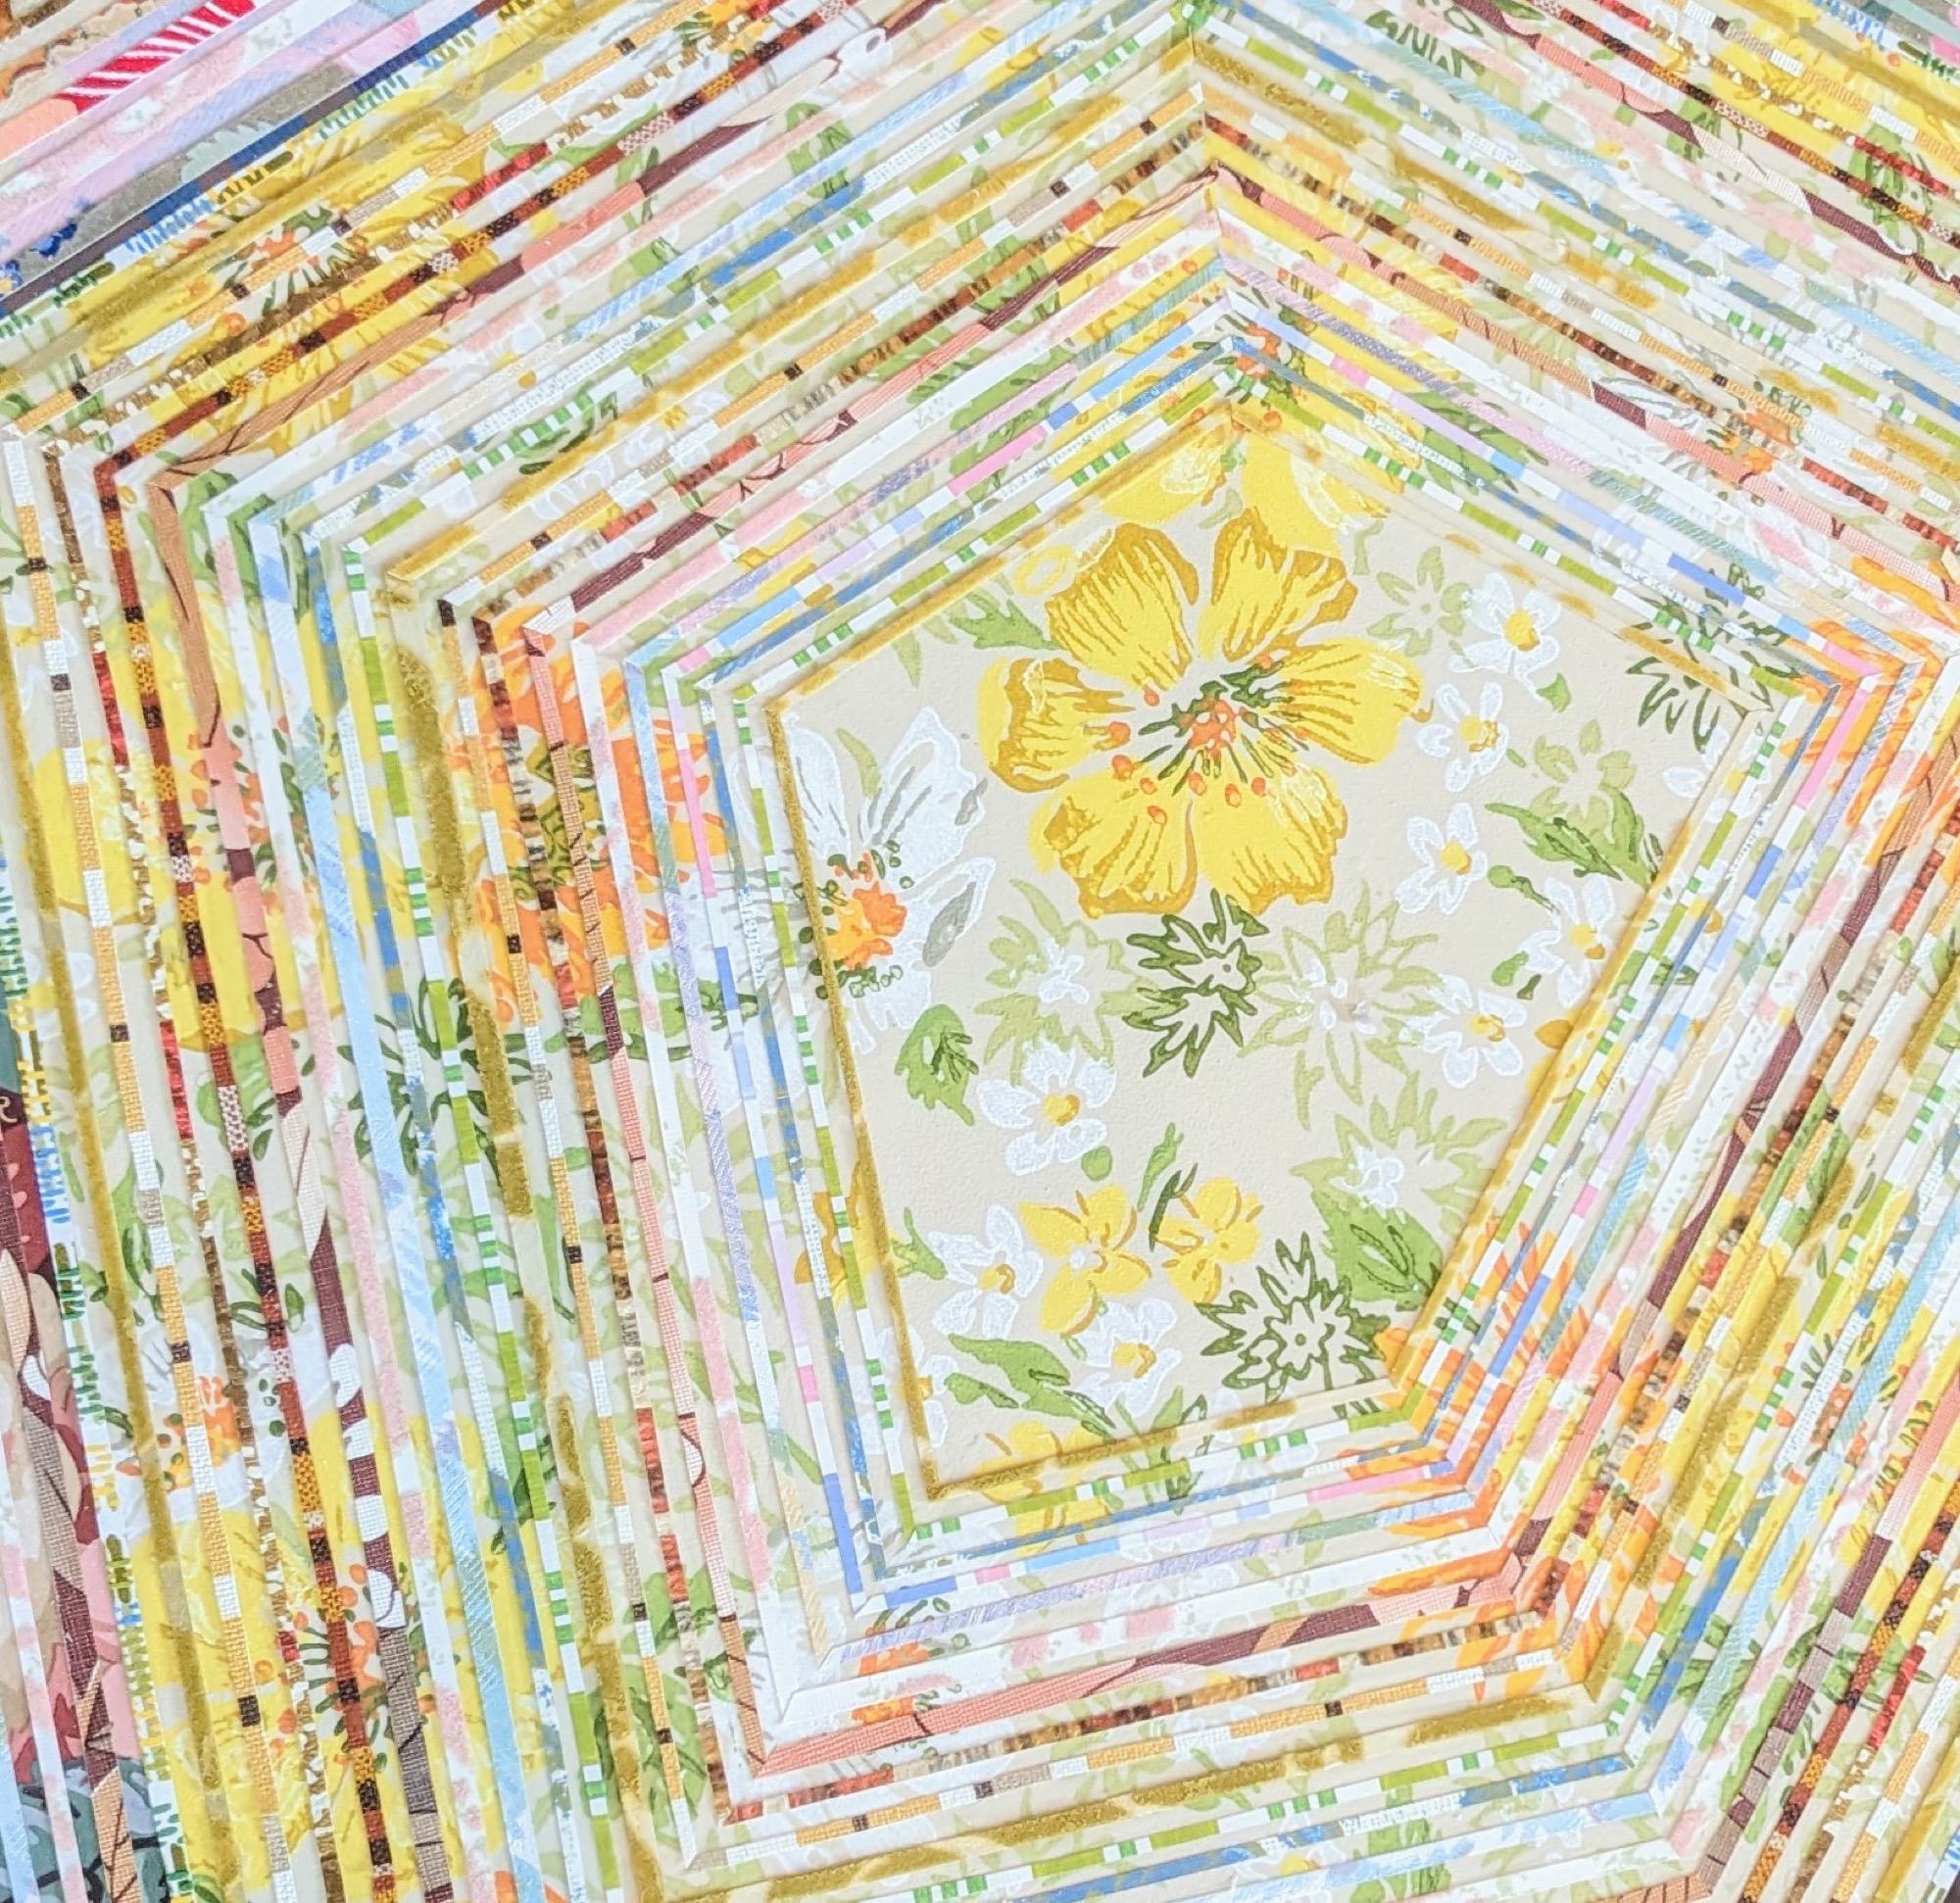 a detail of numerous thin strips of vintage wallpaper in a geometric striped pattern with a yellow flower motif in the center